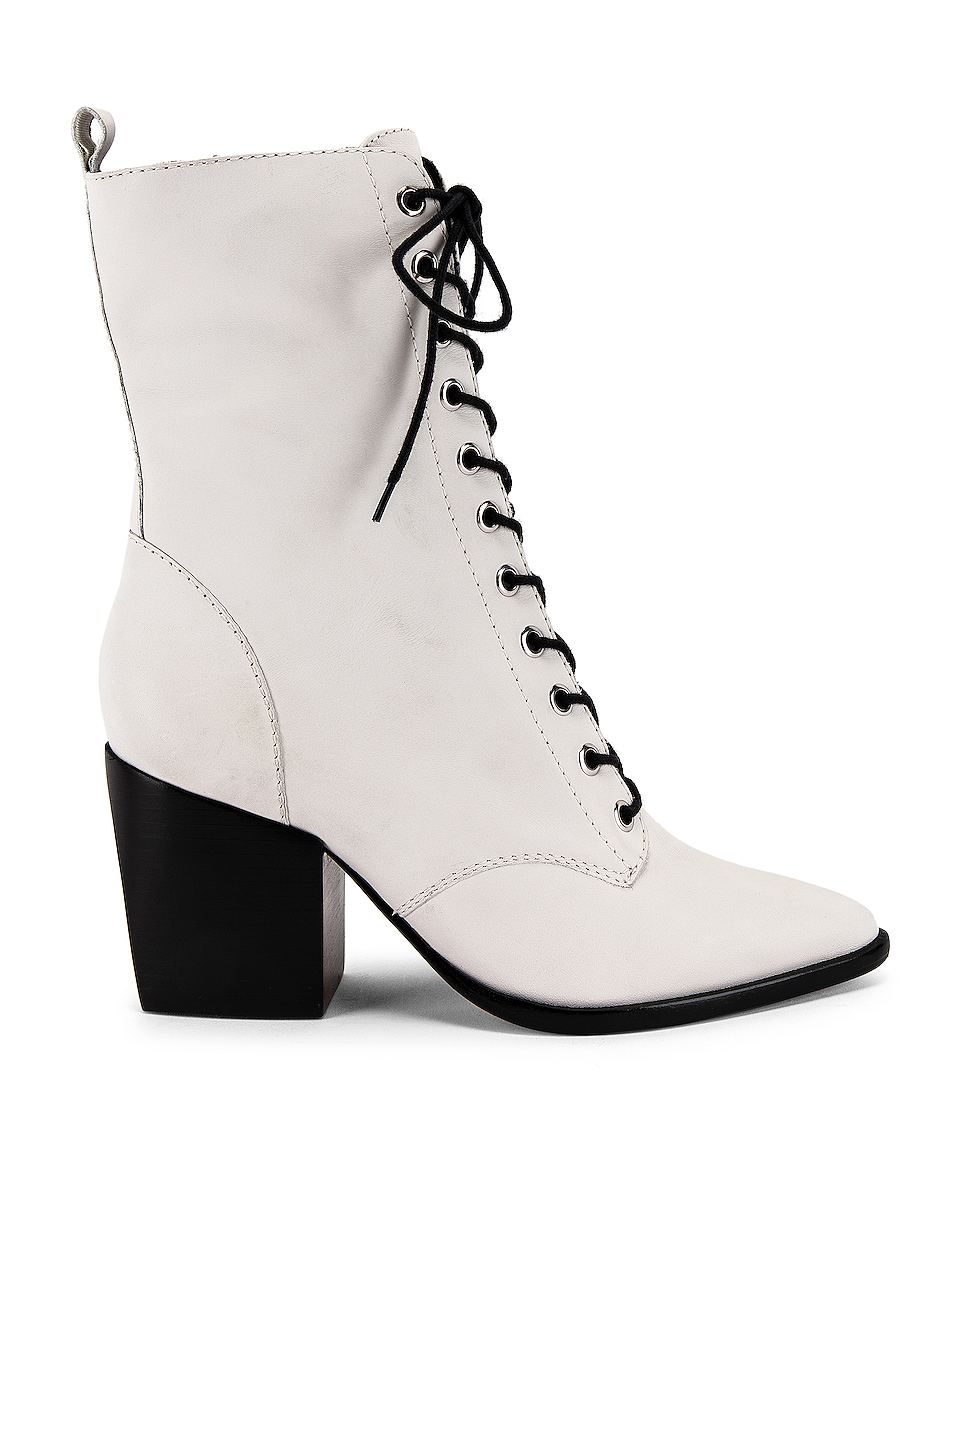 Schutz Lace Up Boot in Pearl | REVOLVE